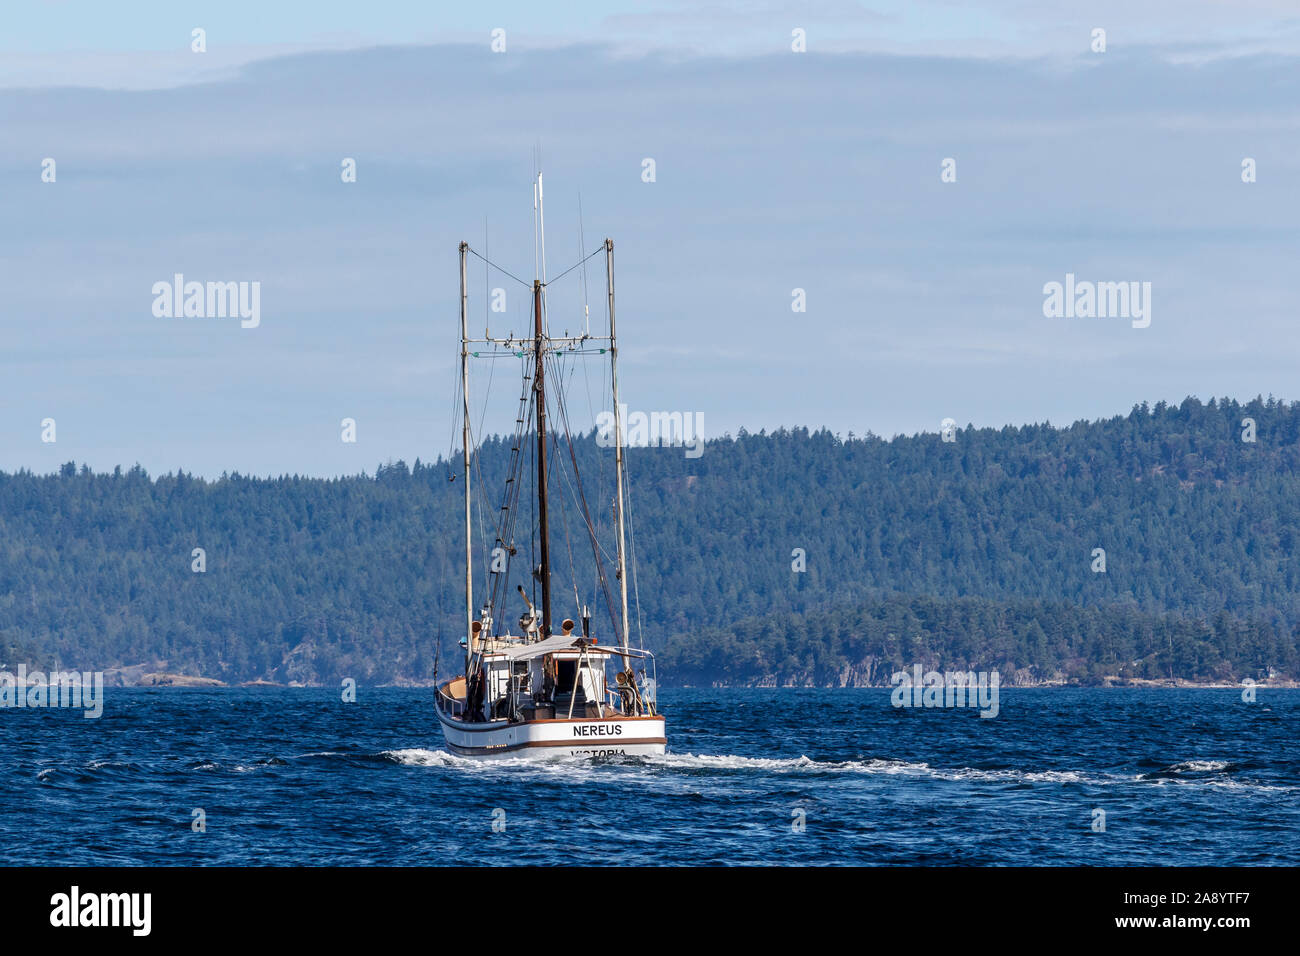 A former commercial fishing vessel that has been converted to a pleasure boat is underway in British Columbia's Gulf Islands (viewed from the stern). Stock Photo